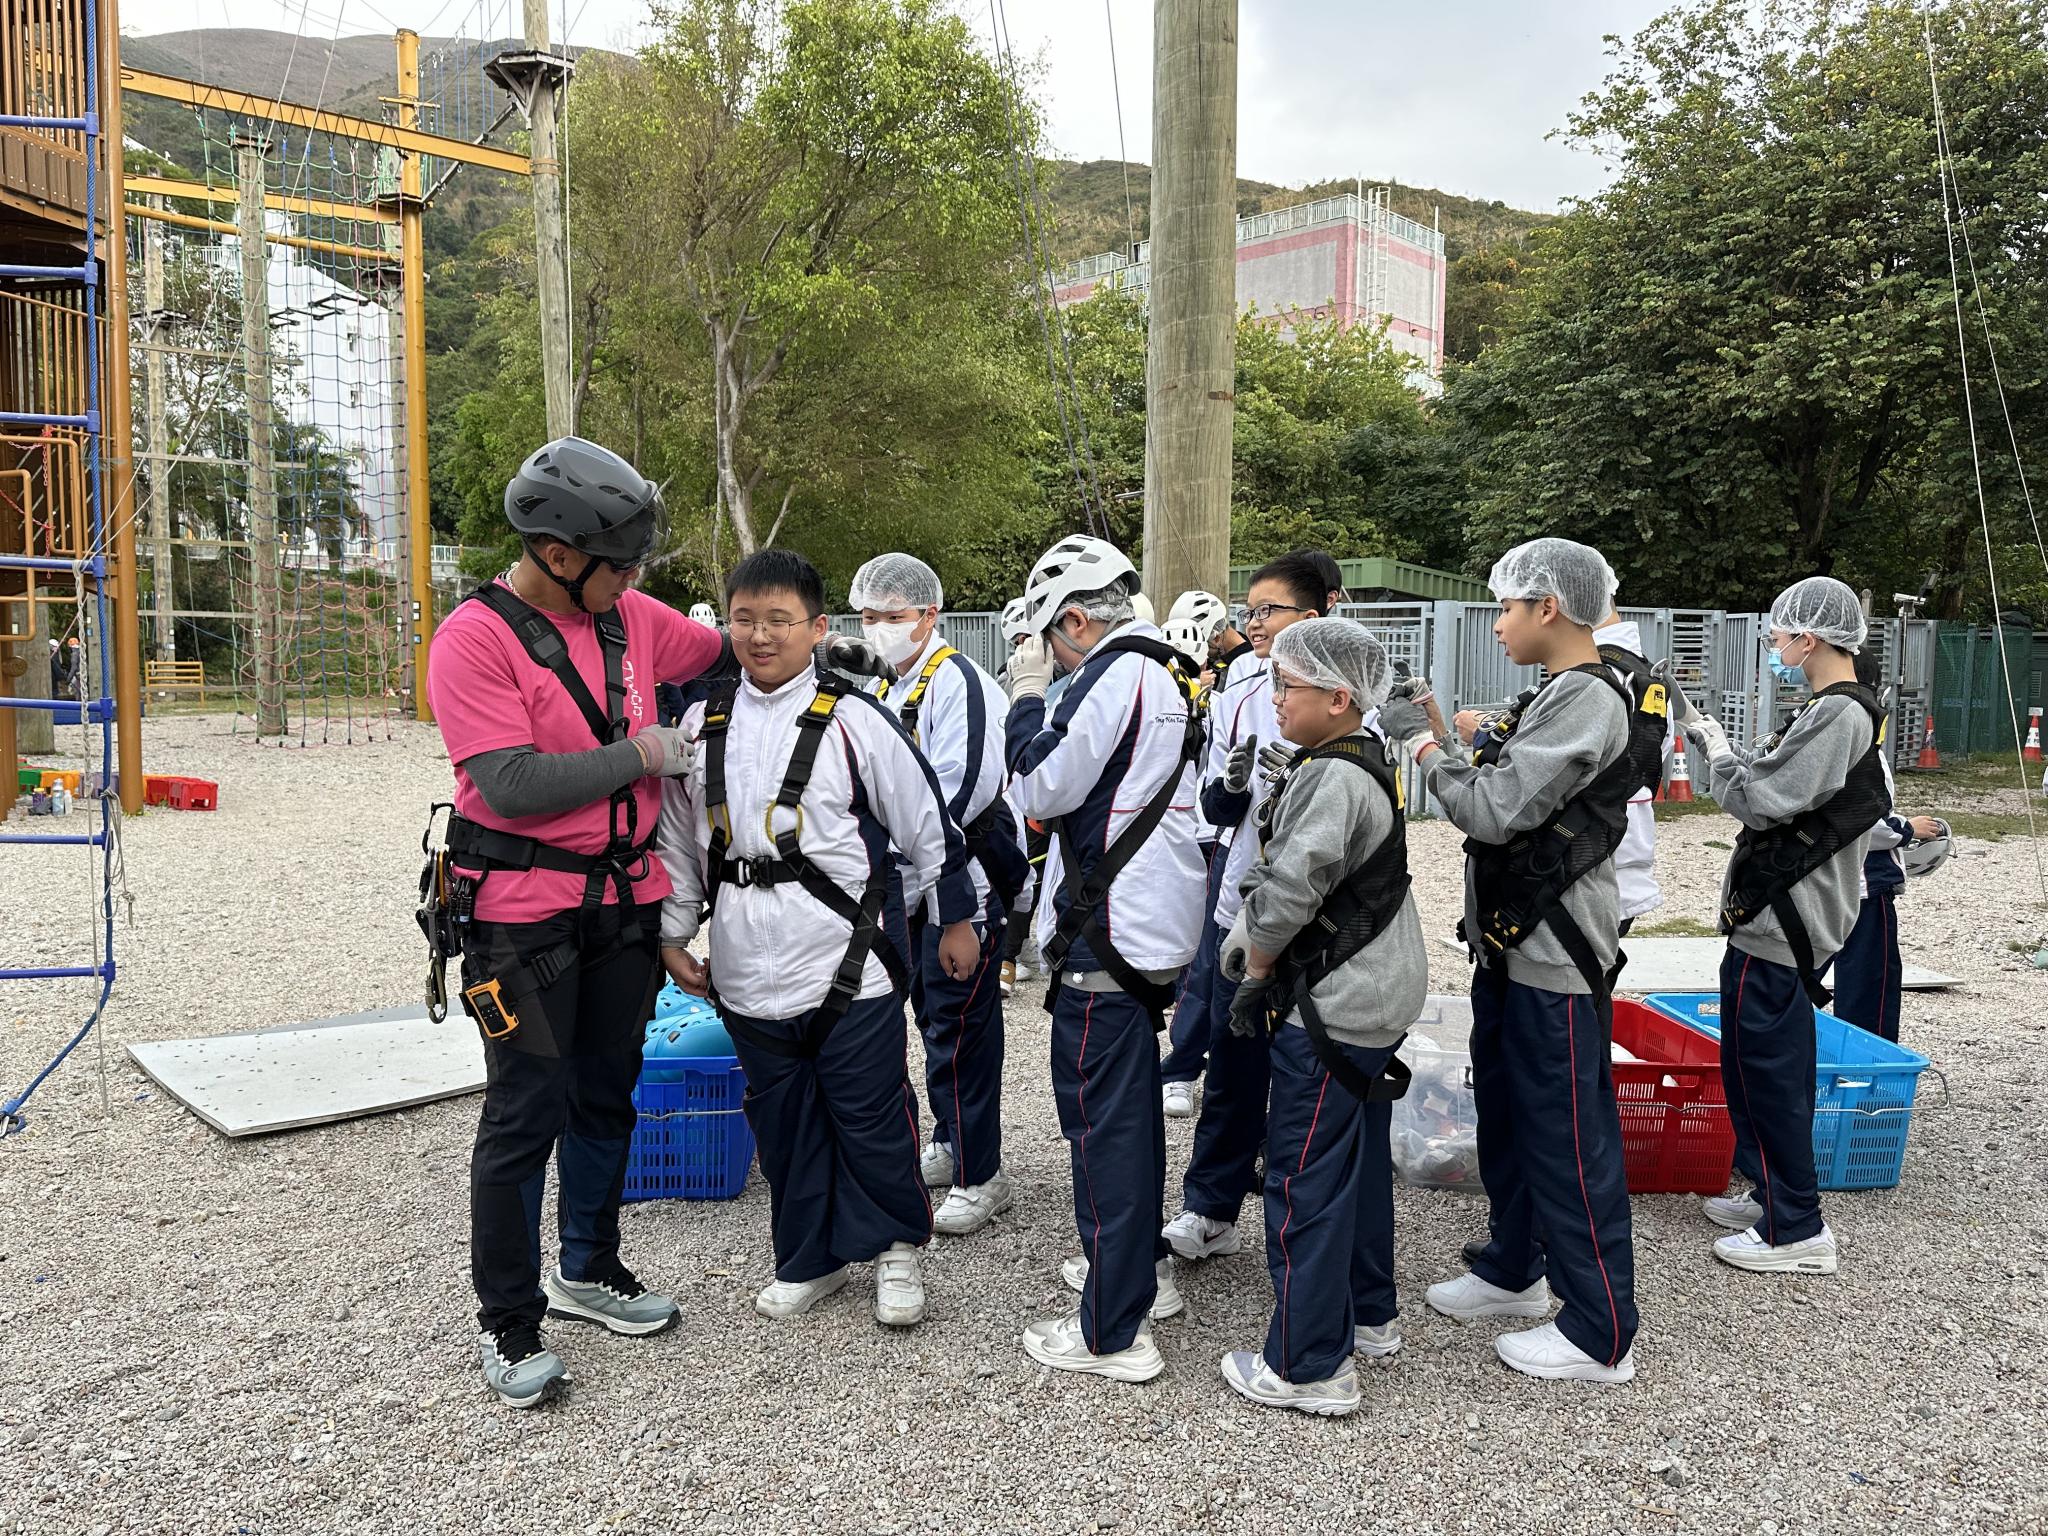 Students preparing for abseiling activity